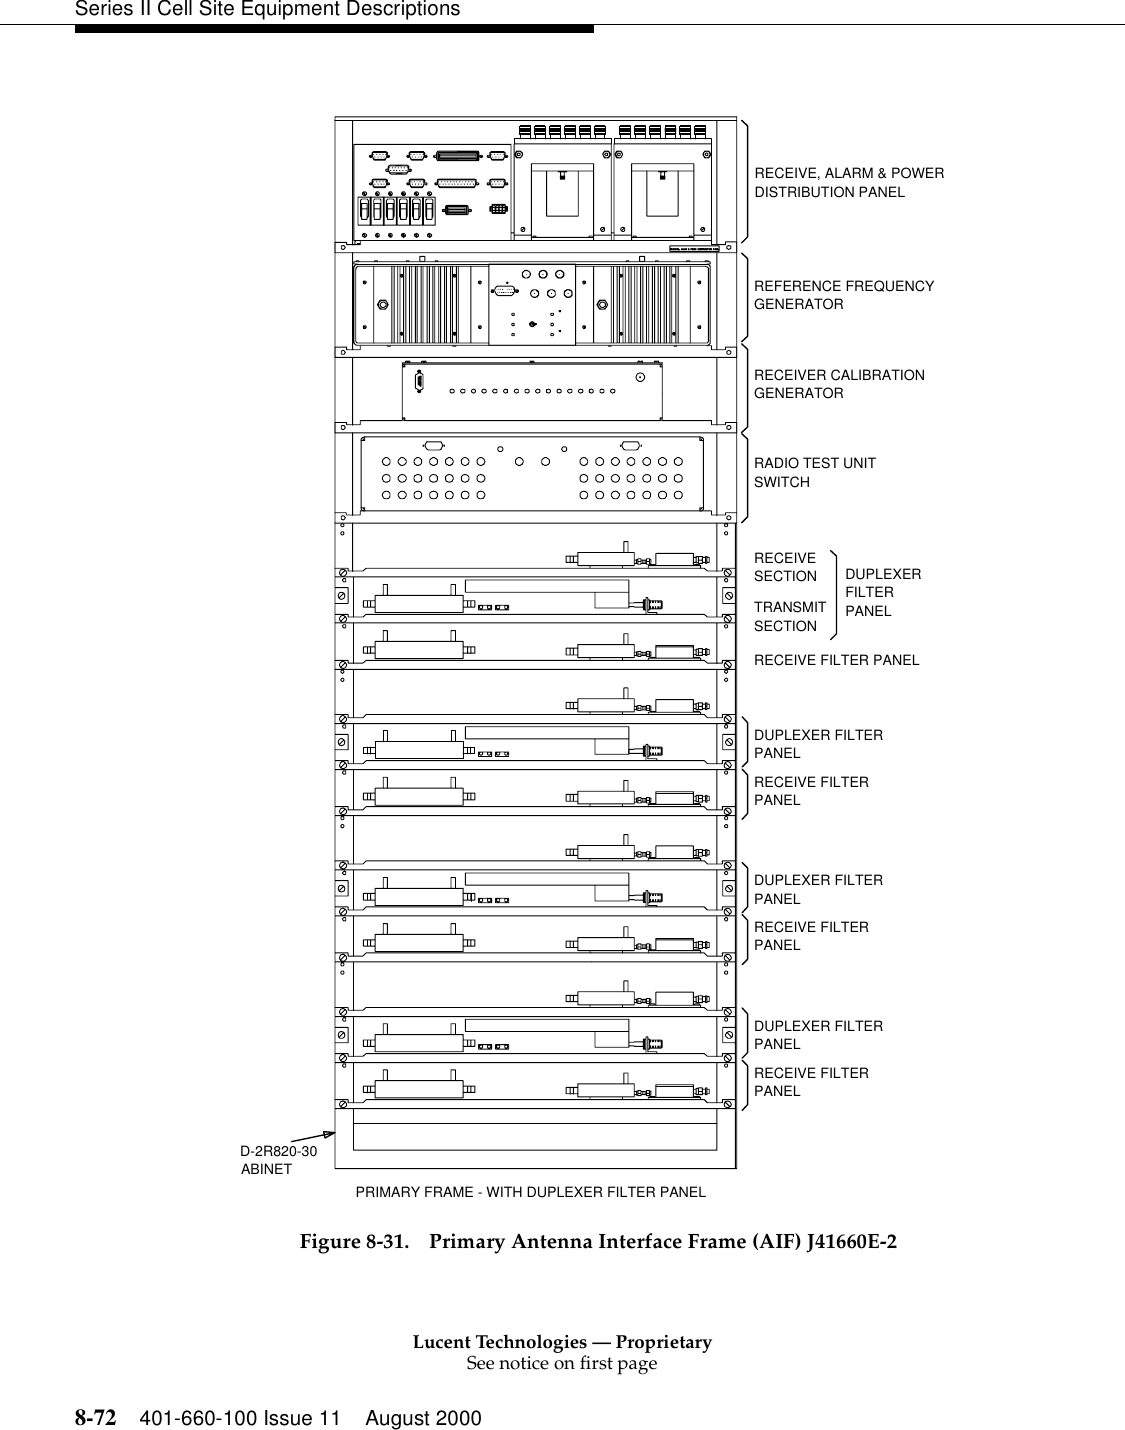 Lucent Technologies — ProprietarySee notice on first page8-72 401-660-100 Issue 11 August 2000Series II Cell Site Equipment DescriptionsFigure 8-31. Primary Antenna Interface Frame (AIF) J41660E-2DUPLEXER FILTERPANELRECEIVE FILTERPANELPANELRECEIVE FILTERPANELDUPLEXER FILTERPANELRECEIVE FILTERPANELABINETRECEIVESECTIONTRANSMITSECTIONRECEIVE FILTER PANELRADIO TEST UNITRECEIVE, ALARM &amp; POWERDISTRIBUTION PANELREFERENCE FREQUENCYRECEIVER CALIBRATIONDUPLEXERFILTERPANELD-2R820-30DUPLEXER FILTERGENERATOR GENERATOR SWITCH PRIMARY FRAME - WITH DUPLEXER FILTER PANEL